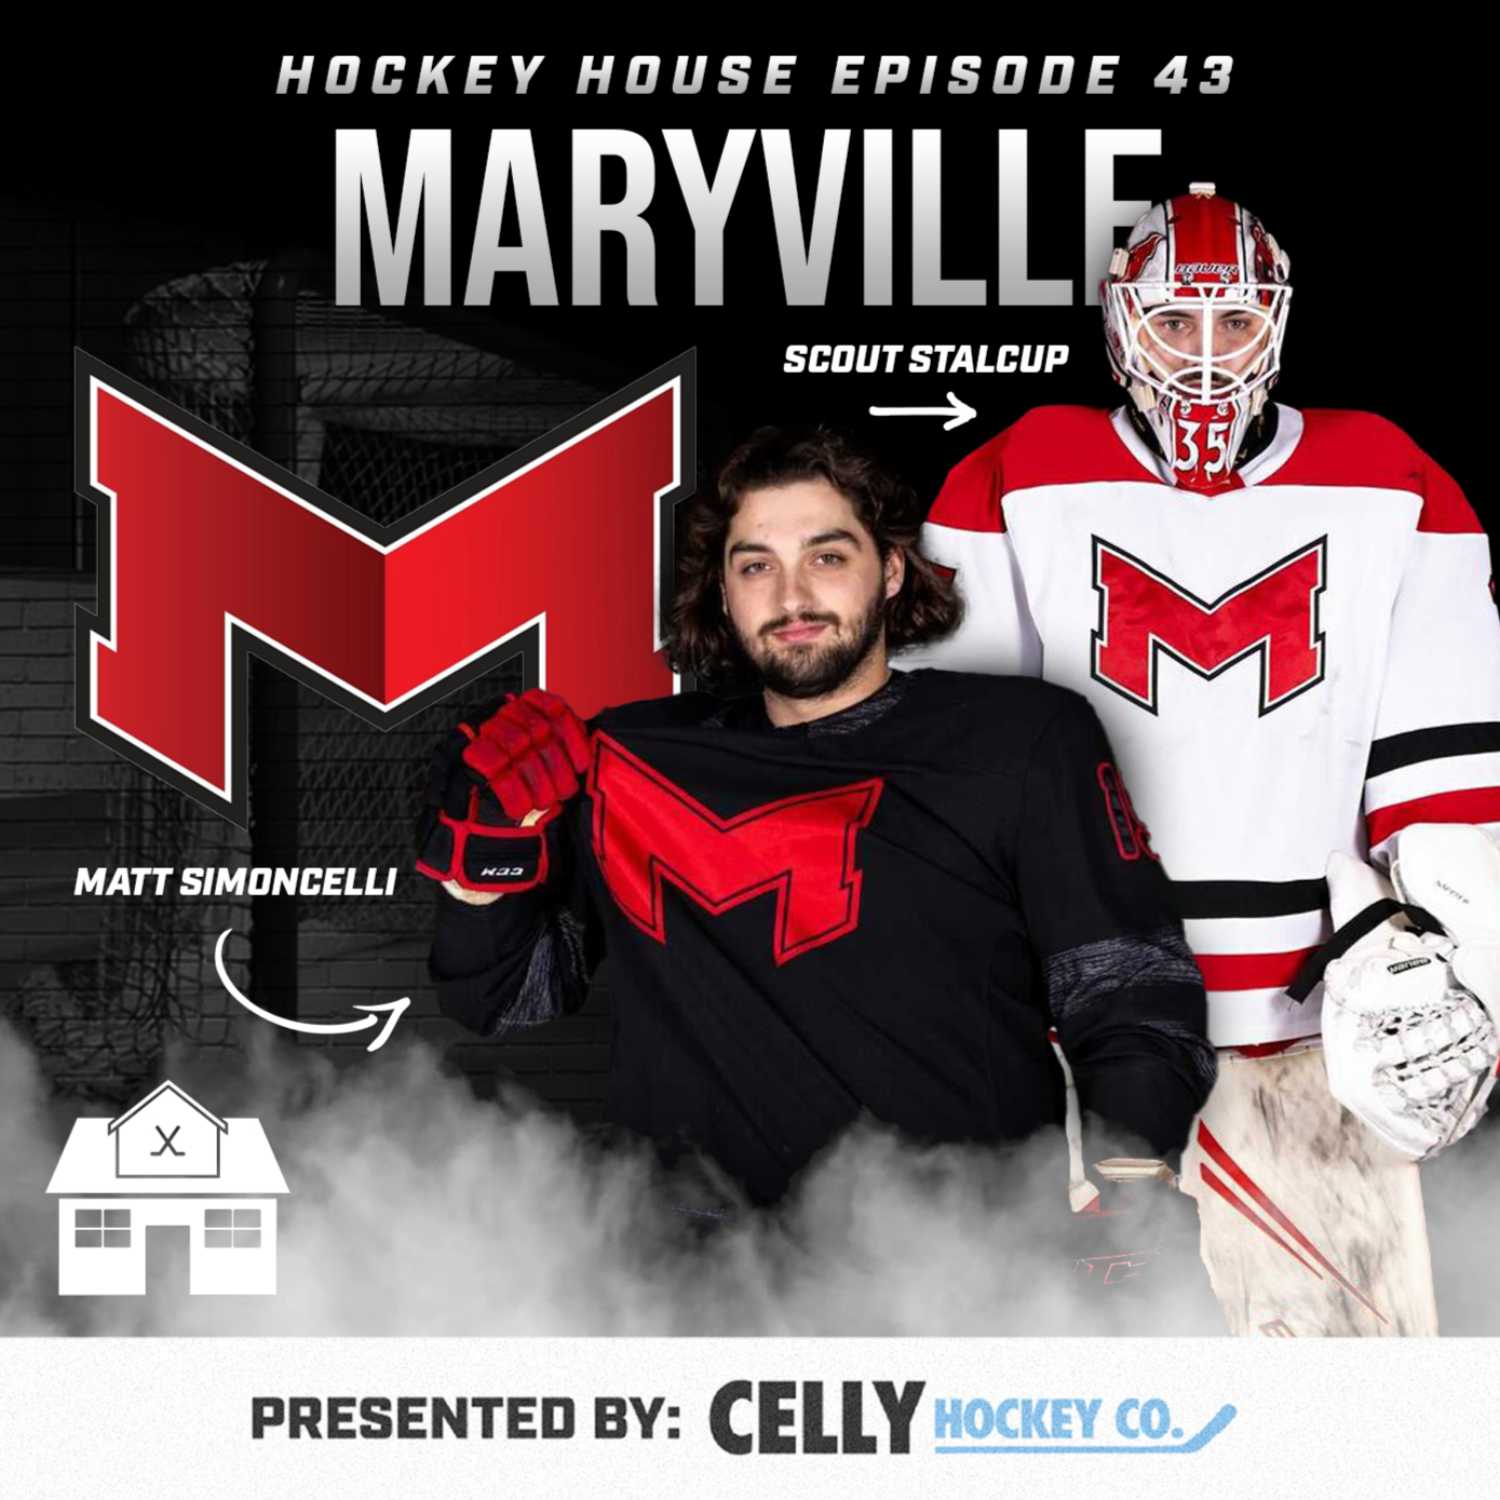 Hockey House Episode 43: Maryville | Matt Simoncelli and Scout Stalcup